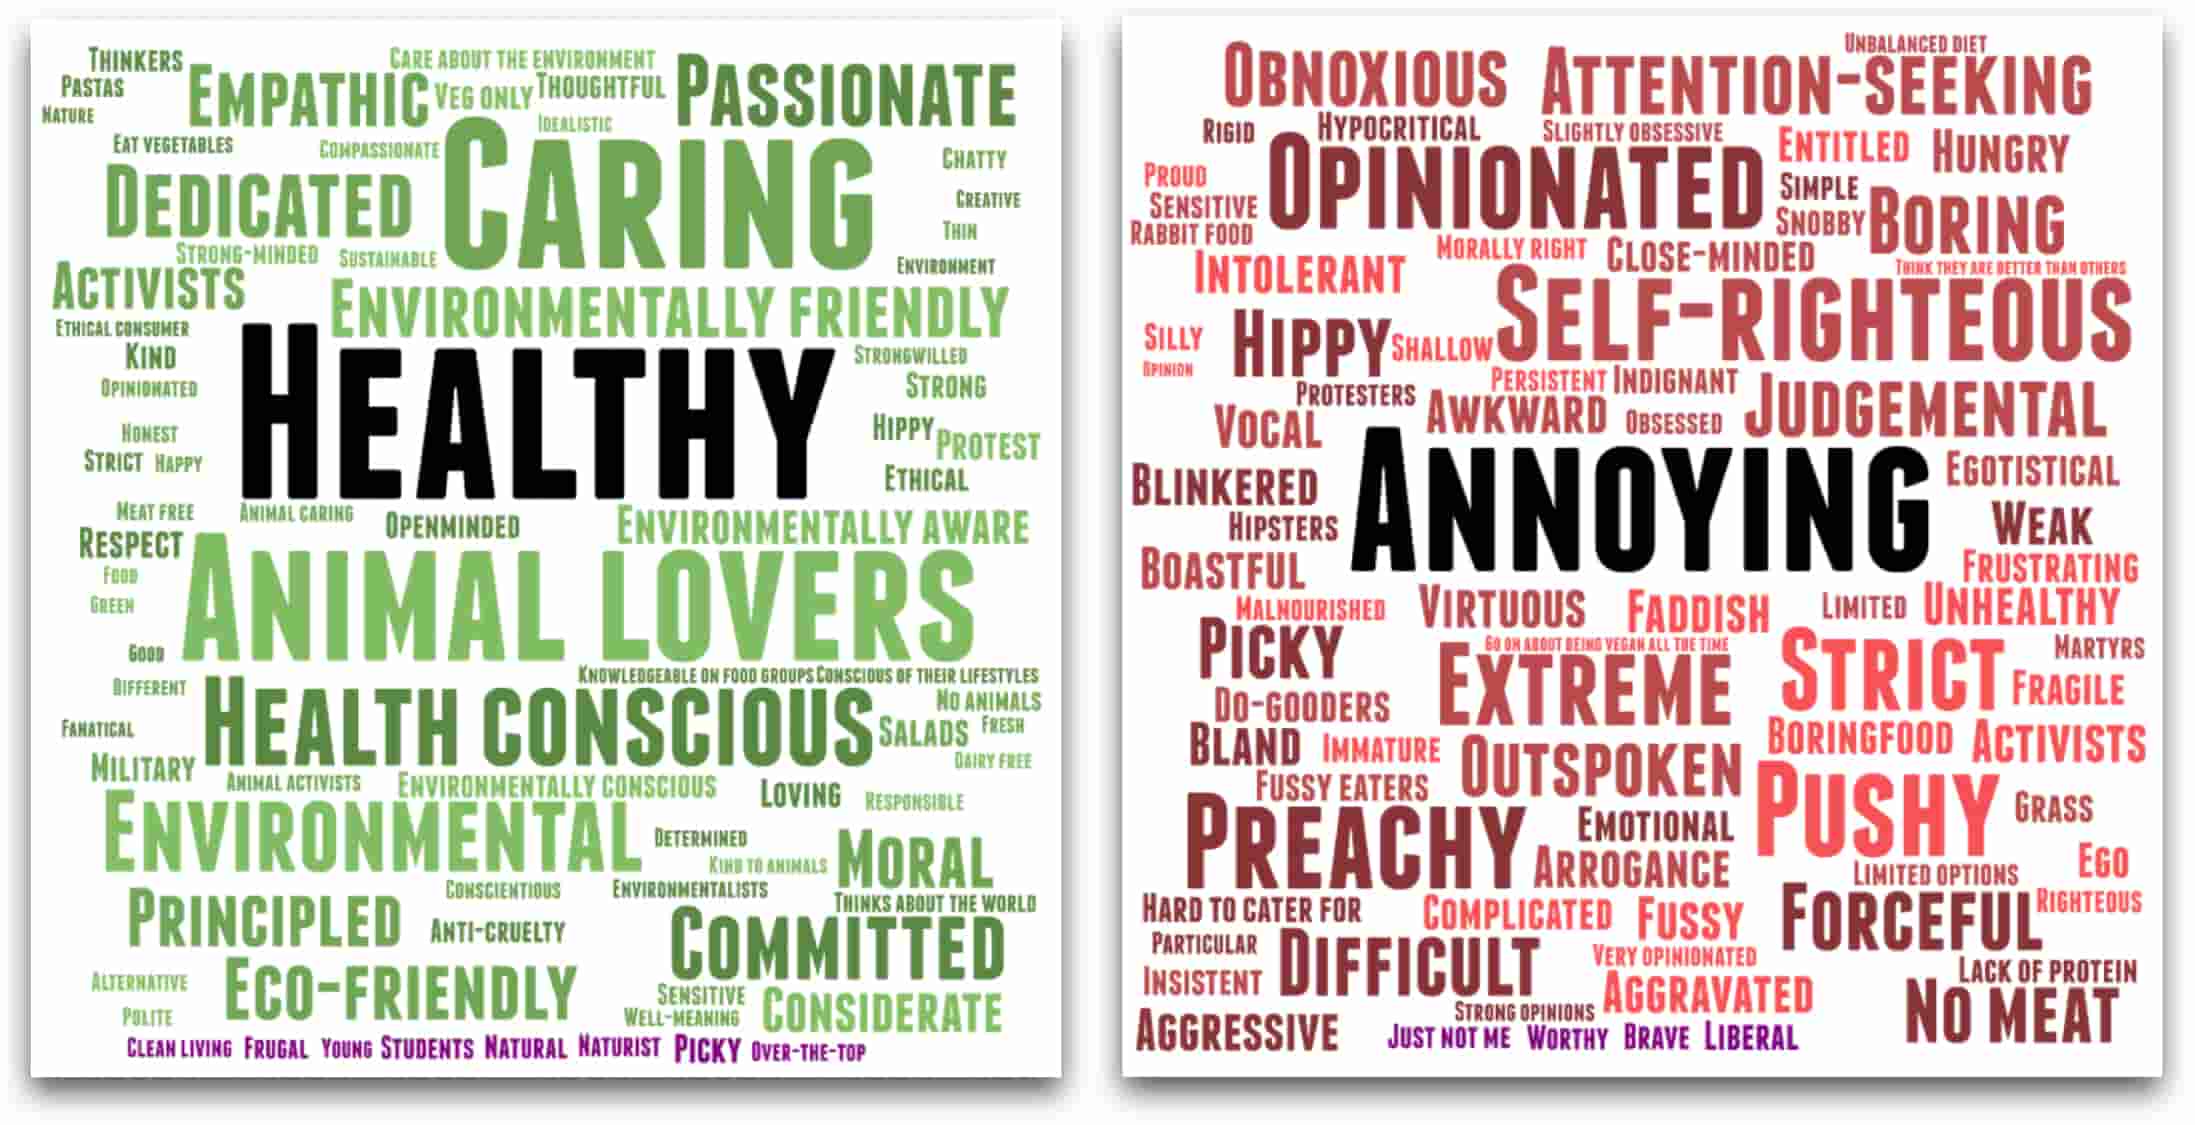 Clusters of positive and negative words omnivorous study participants associated with vegans. The largest are the most commonly given. The negative outweigh the positive, with "annoying" and "self-righteous" among the largest.